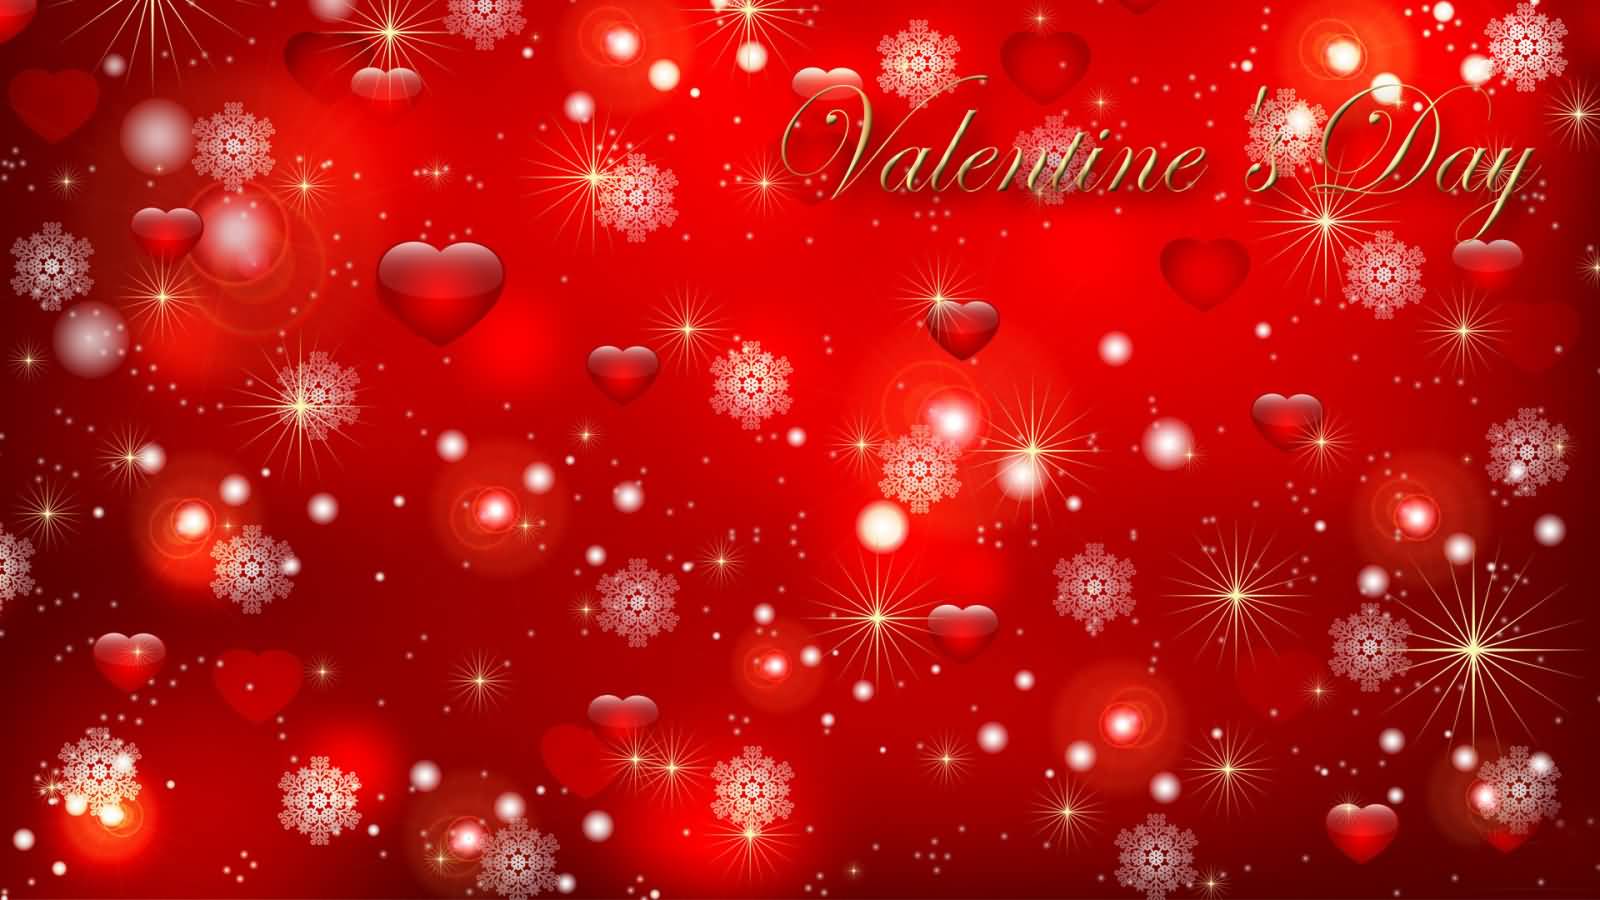 Happy Valentine's Day Hearts And Snowflakes Wallpaper